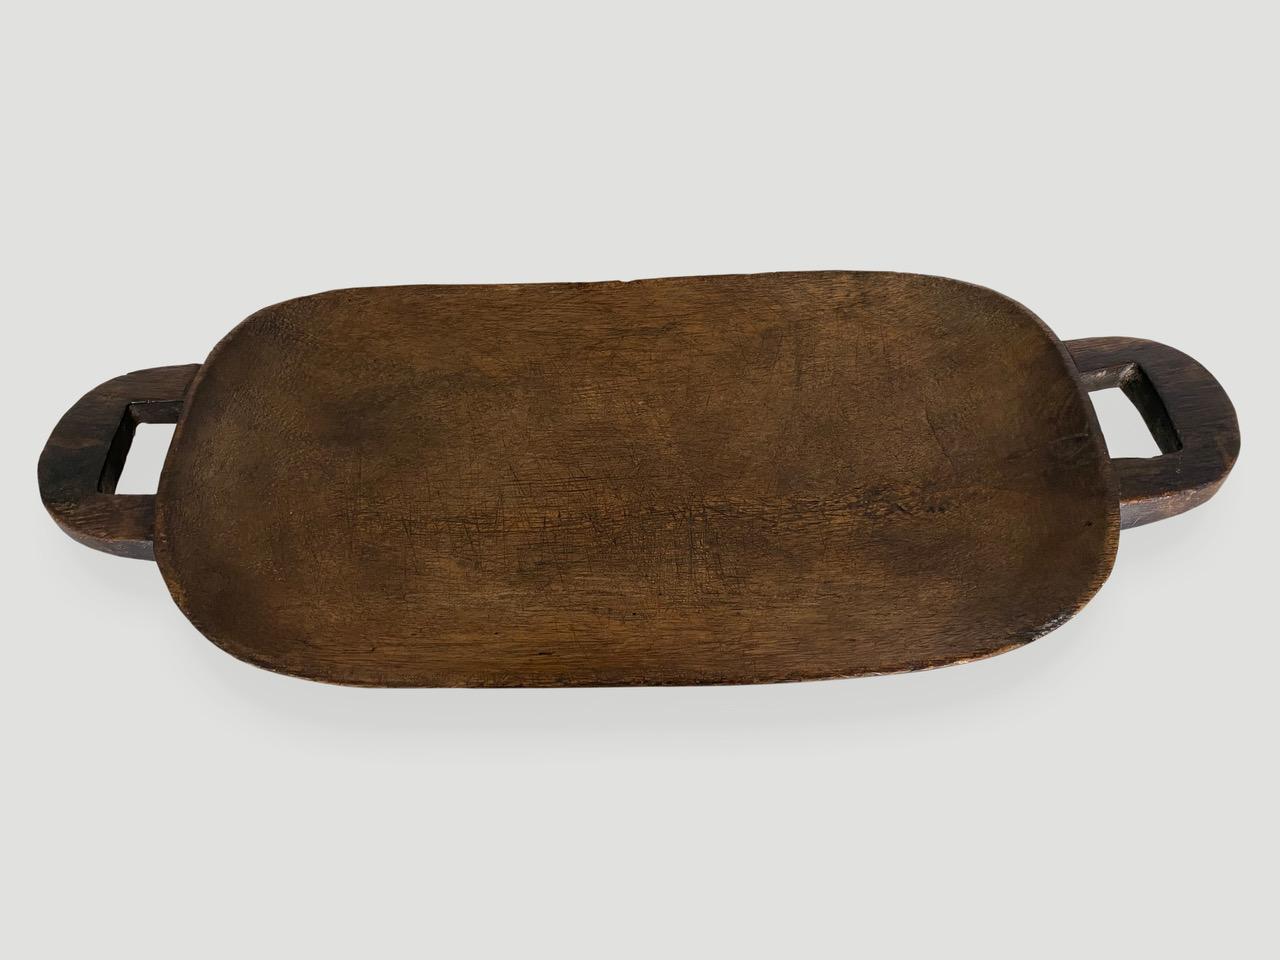 Beautiful patina on this fabulous African Zulu platter hand carved from a single block of wood. Stunning. Mid 20th C.

This wooden platter was sourced in the spirit of wabi-sabi, a Japanese philosophy that beauty can be found in imperfection and